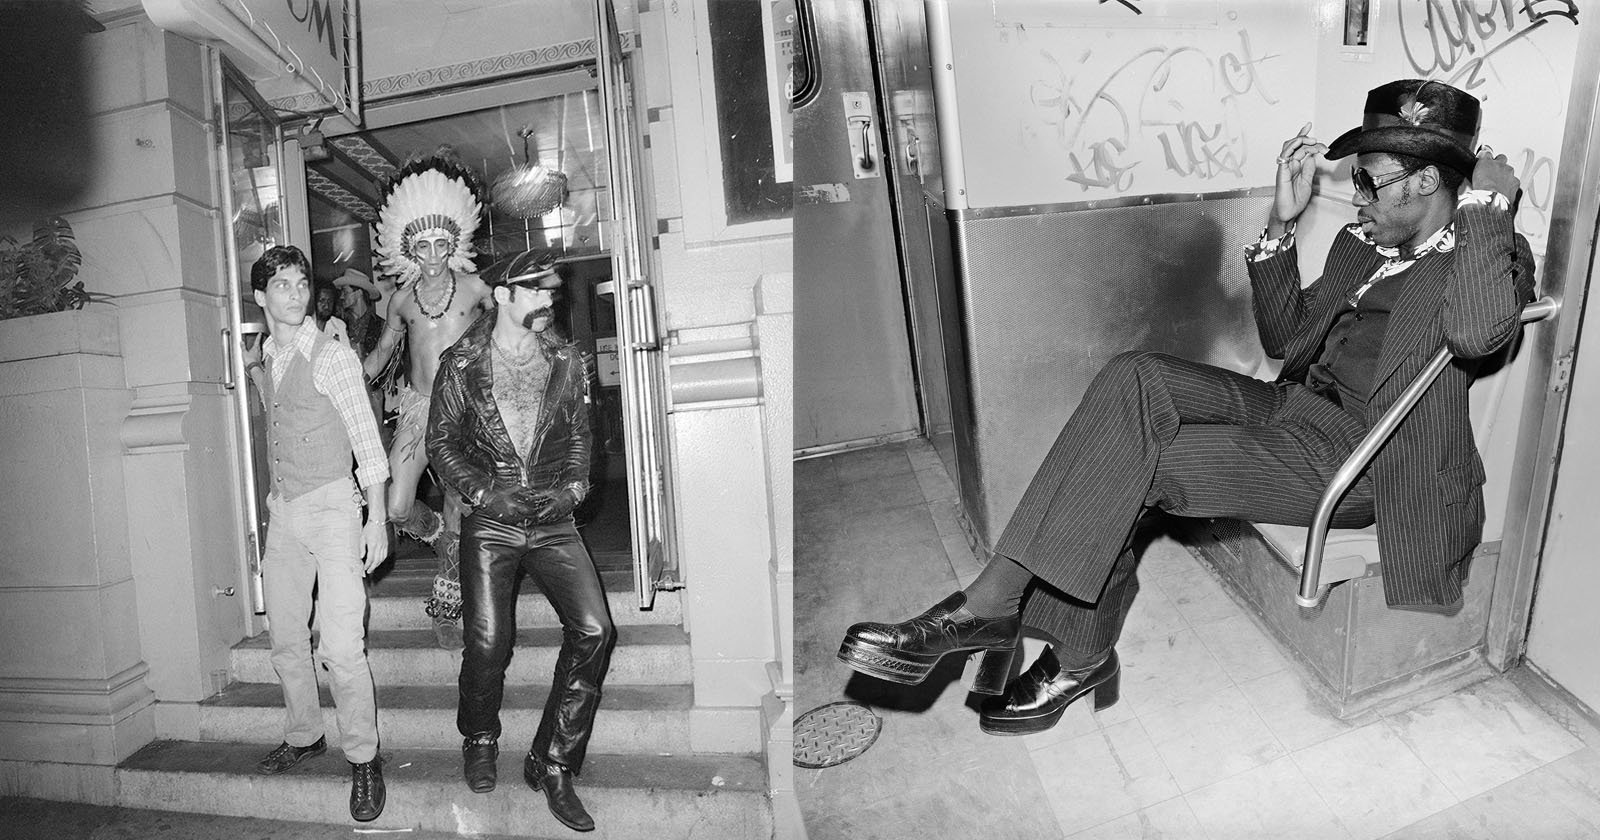 Frenetic Photos of New York Nightlife in the 1970s